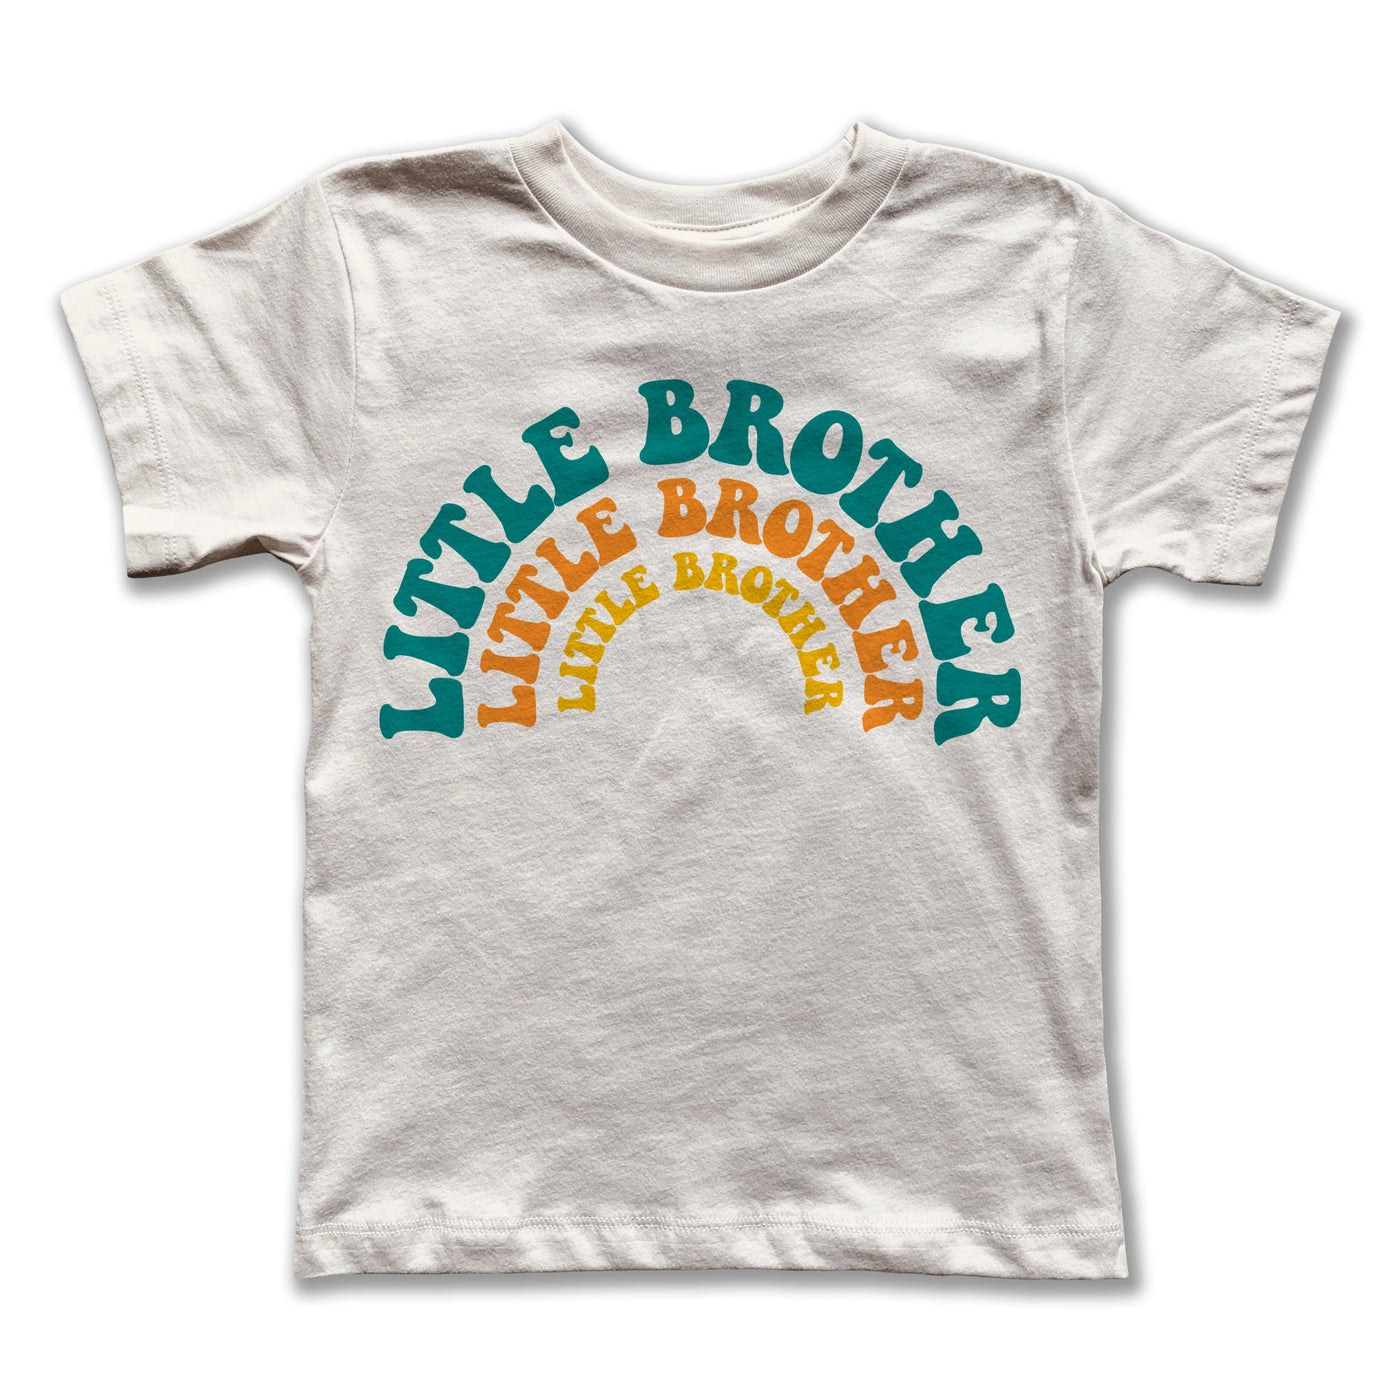 Rivet Apparel Co. - Little Brother Tee - Two Little Birds Boutique